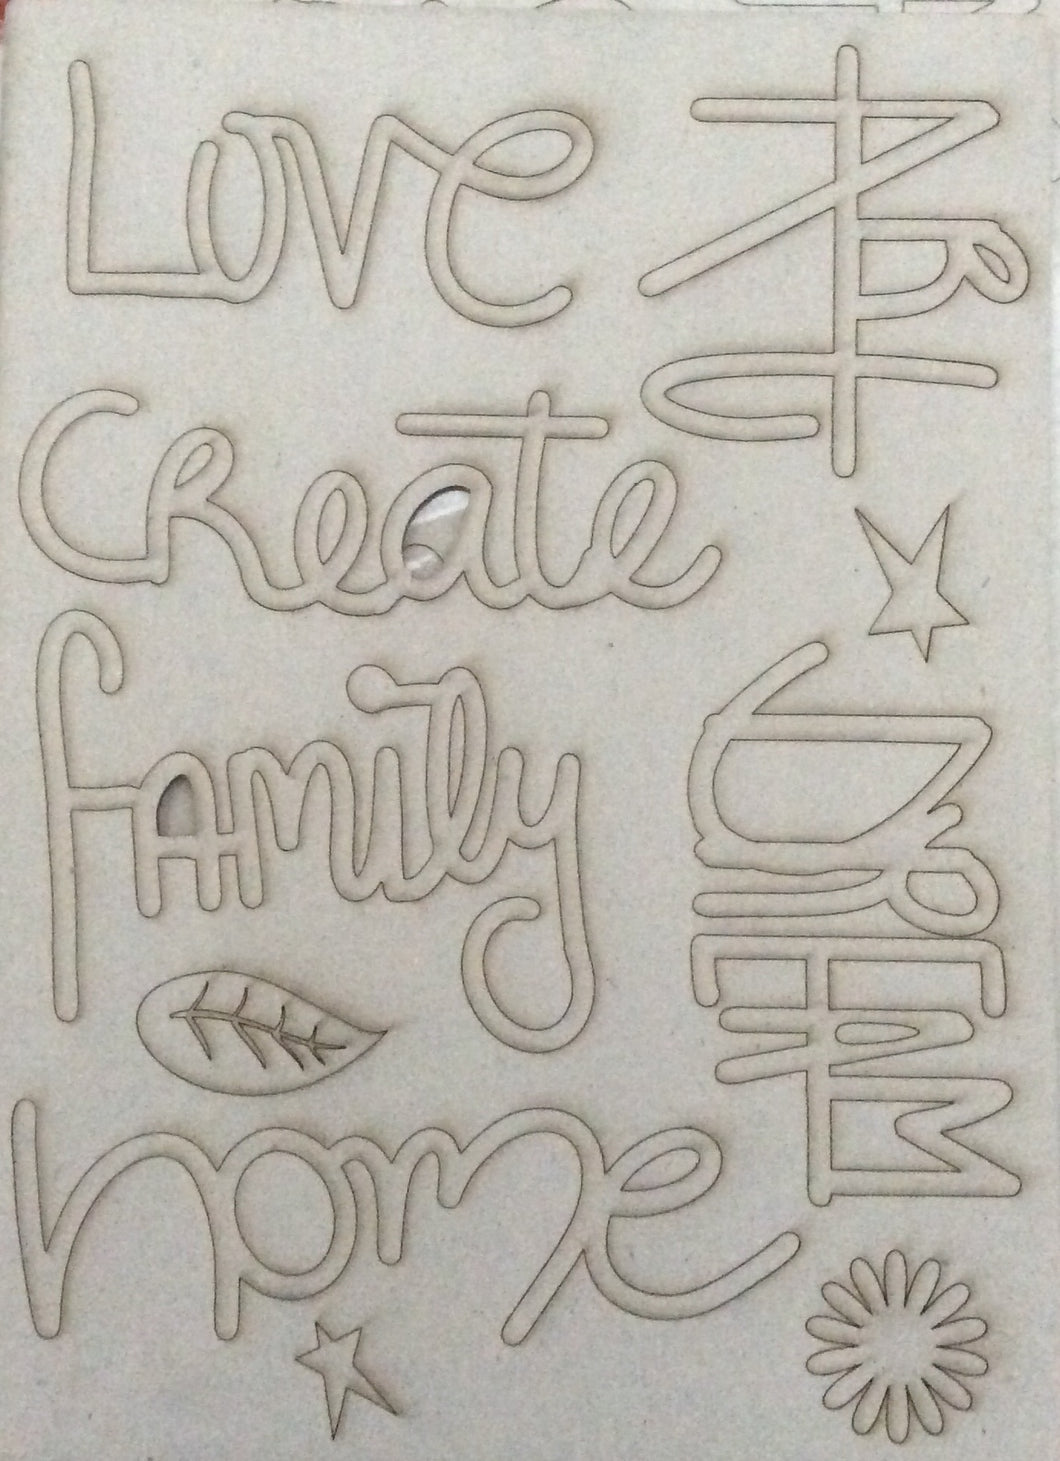 A4 Leonie Pujol Mixed Media Greyboard Words - Love